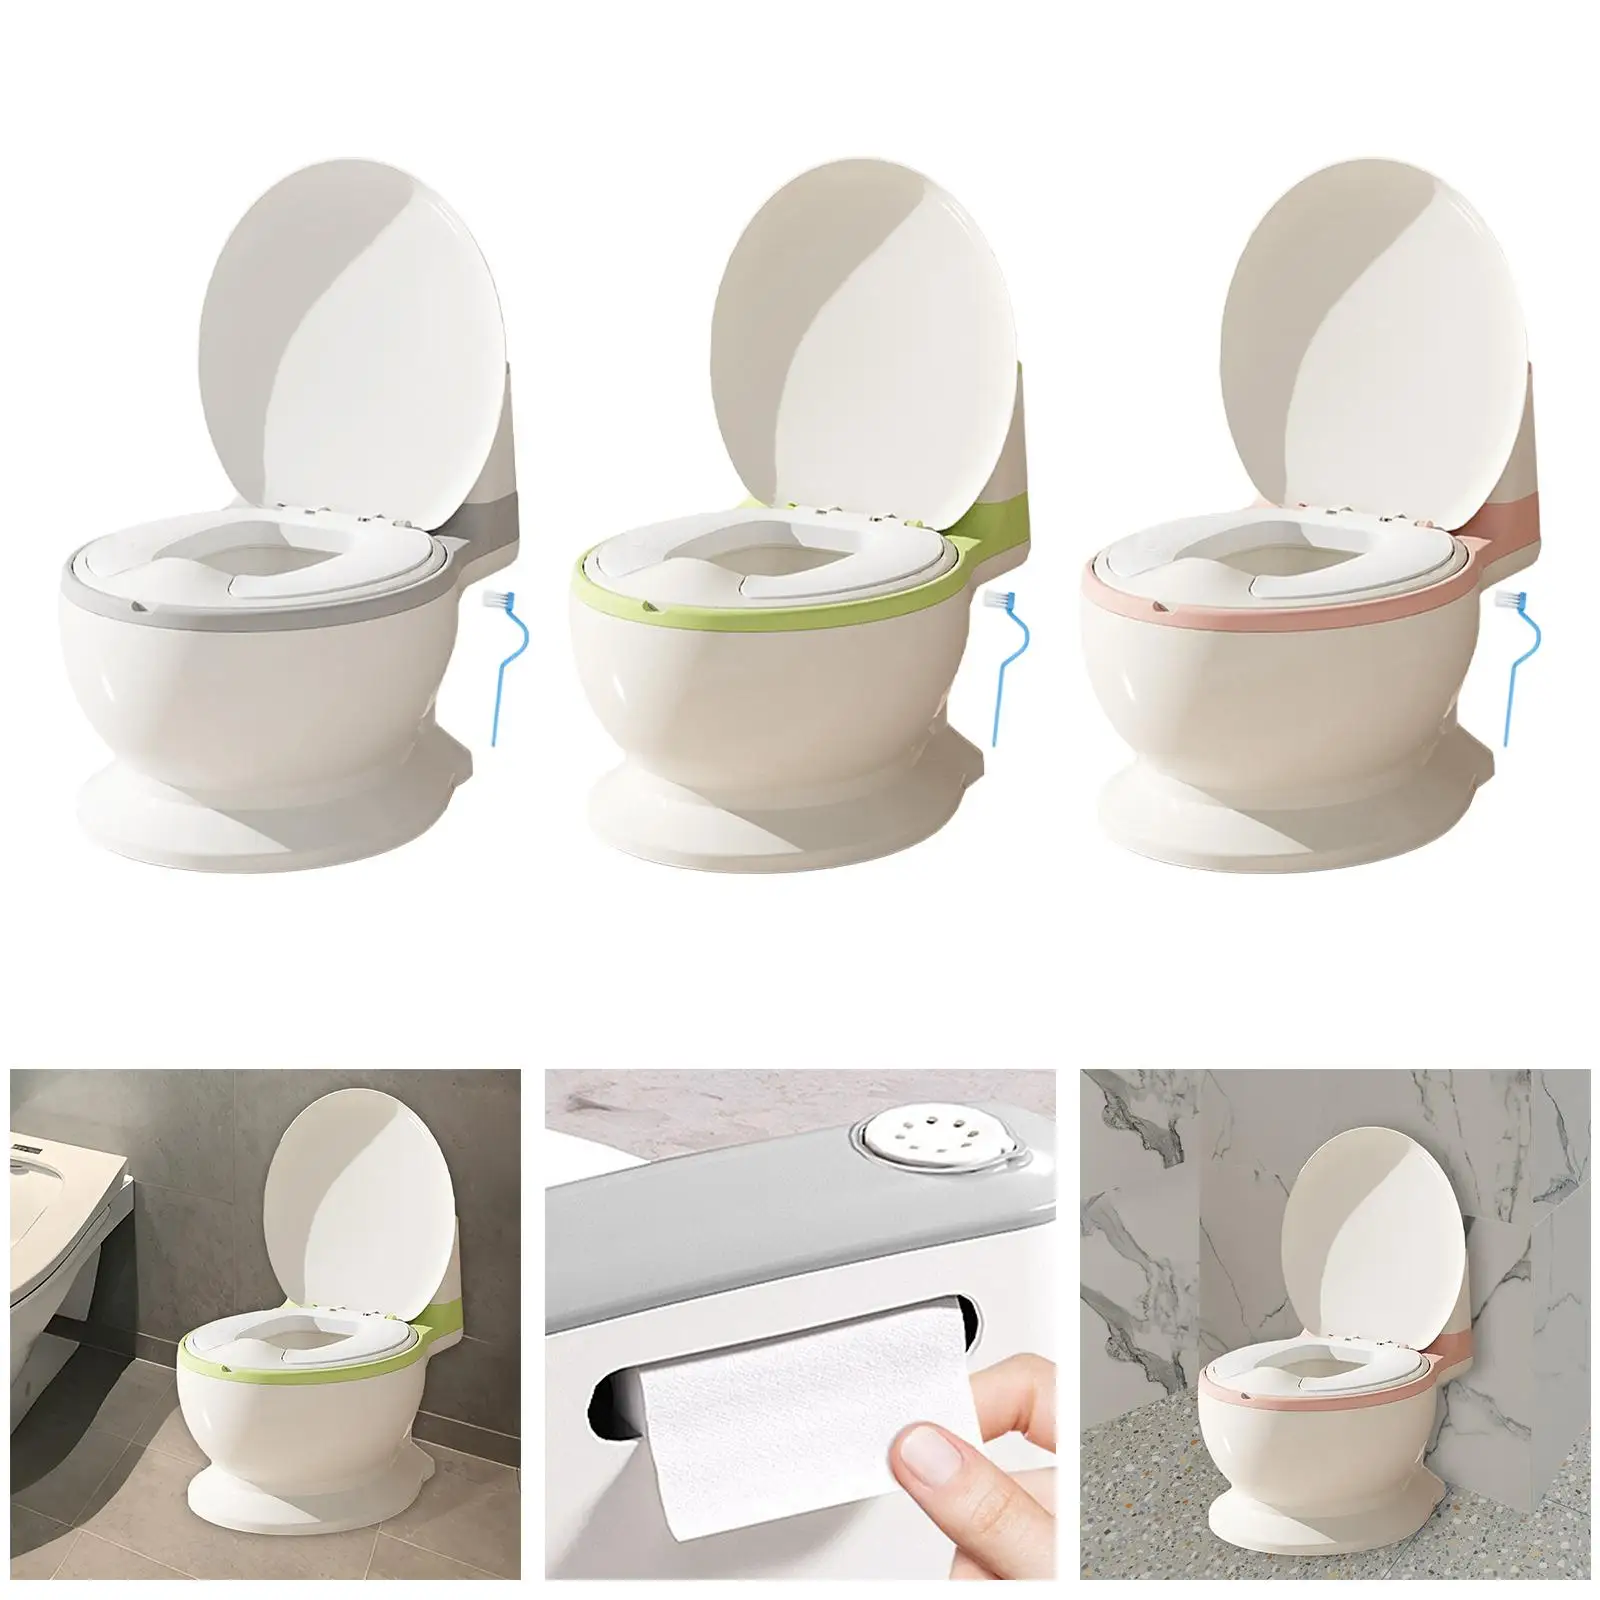 Toilet Training Potty Includes Cleaning Brush Kids Potty Chair for Infants